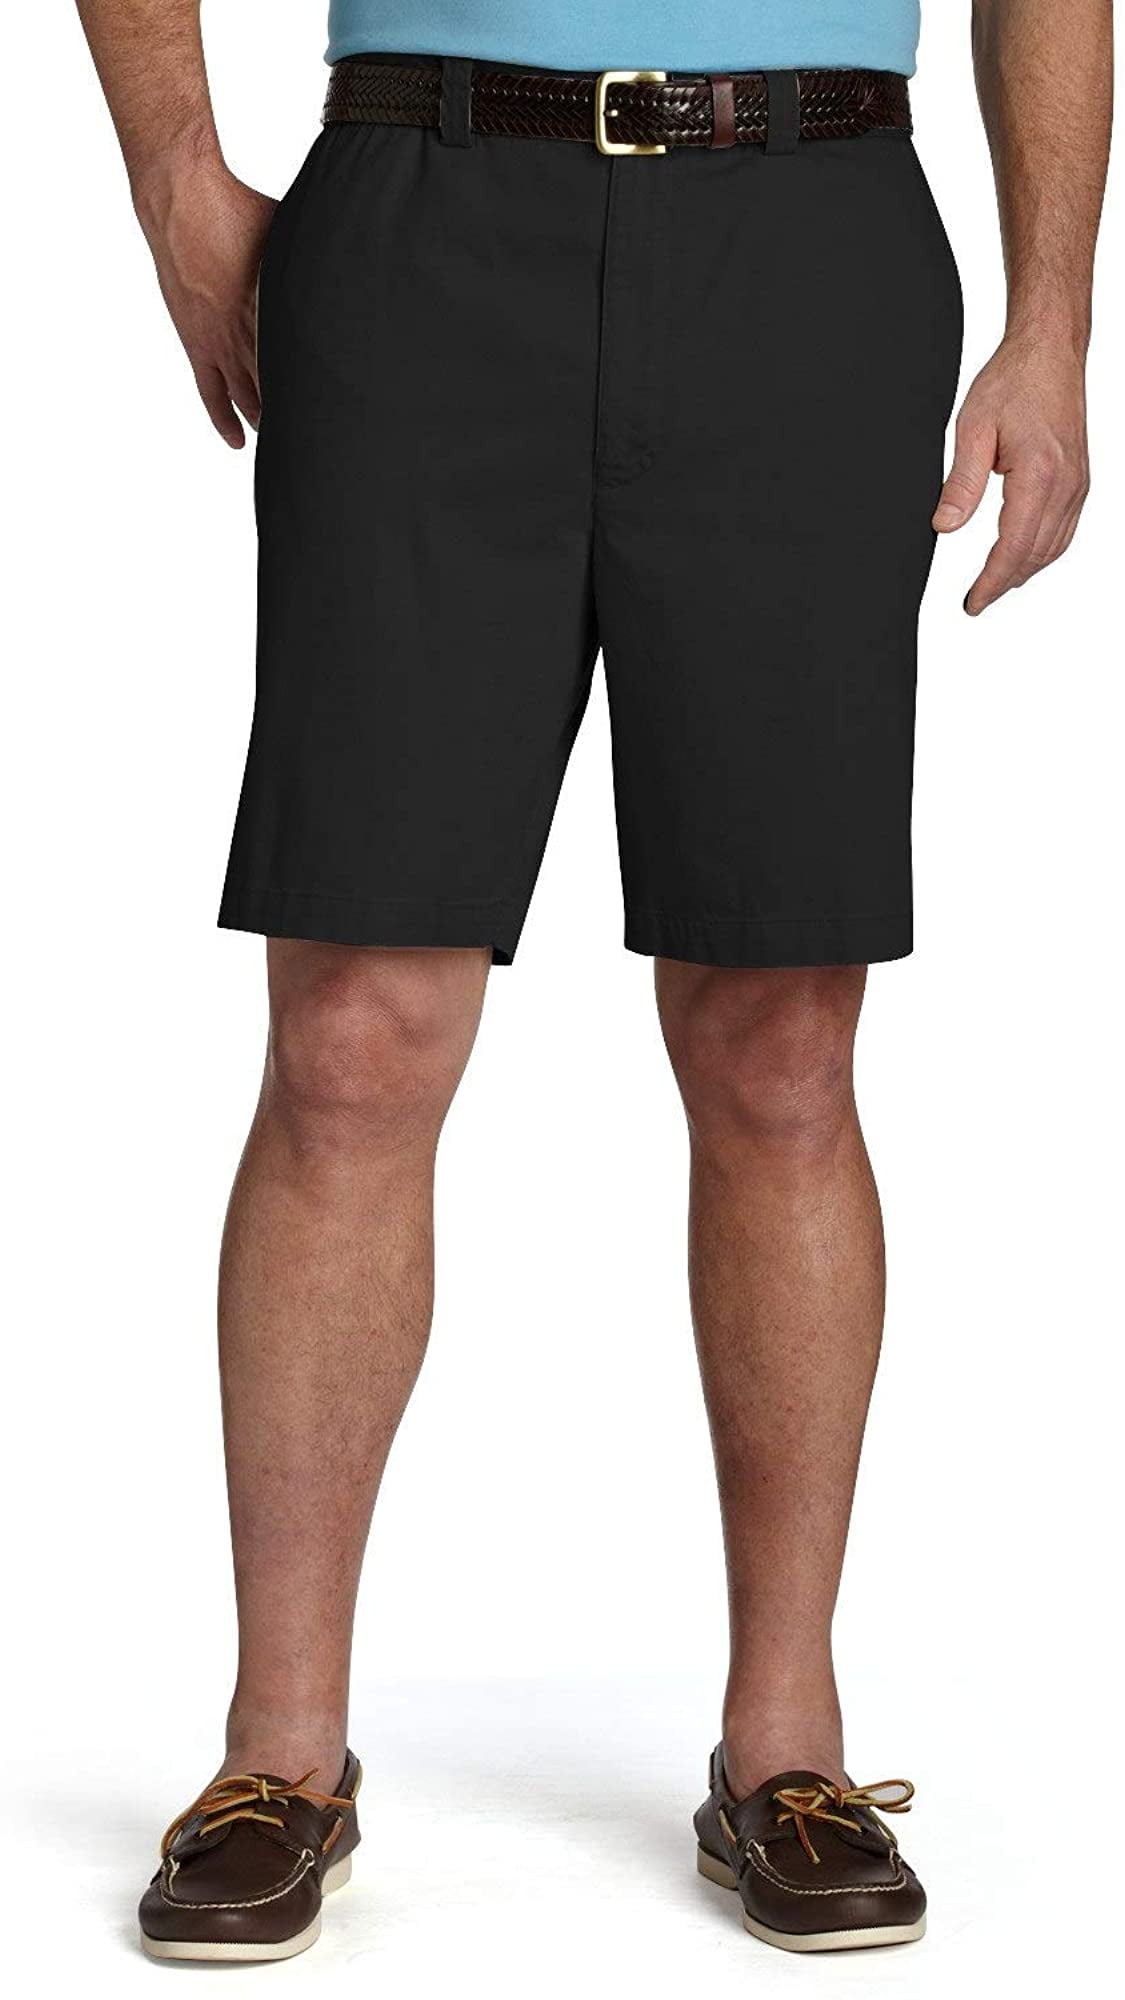 Harbor Bay by DXL Big and Tall Waist-Relaxer Shorts | Walmart Canada